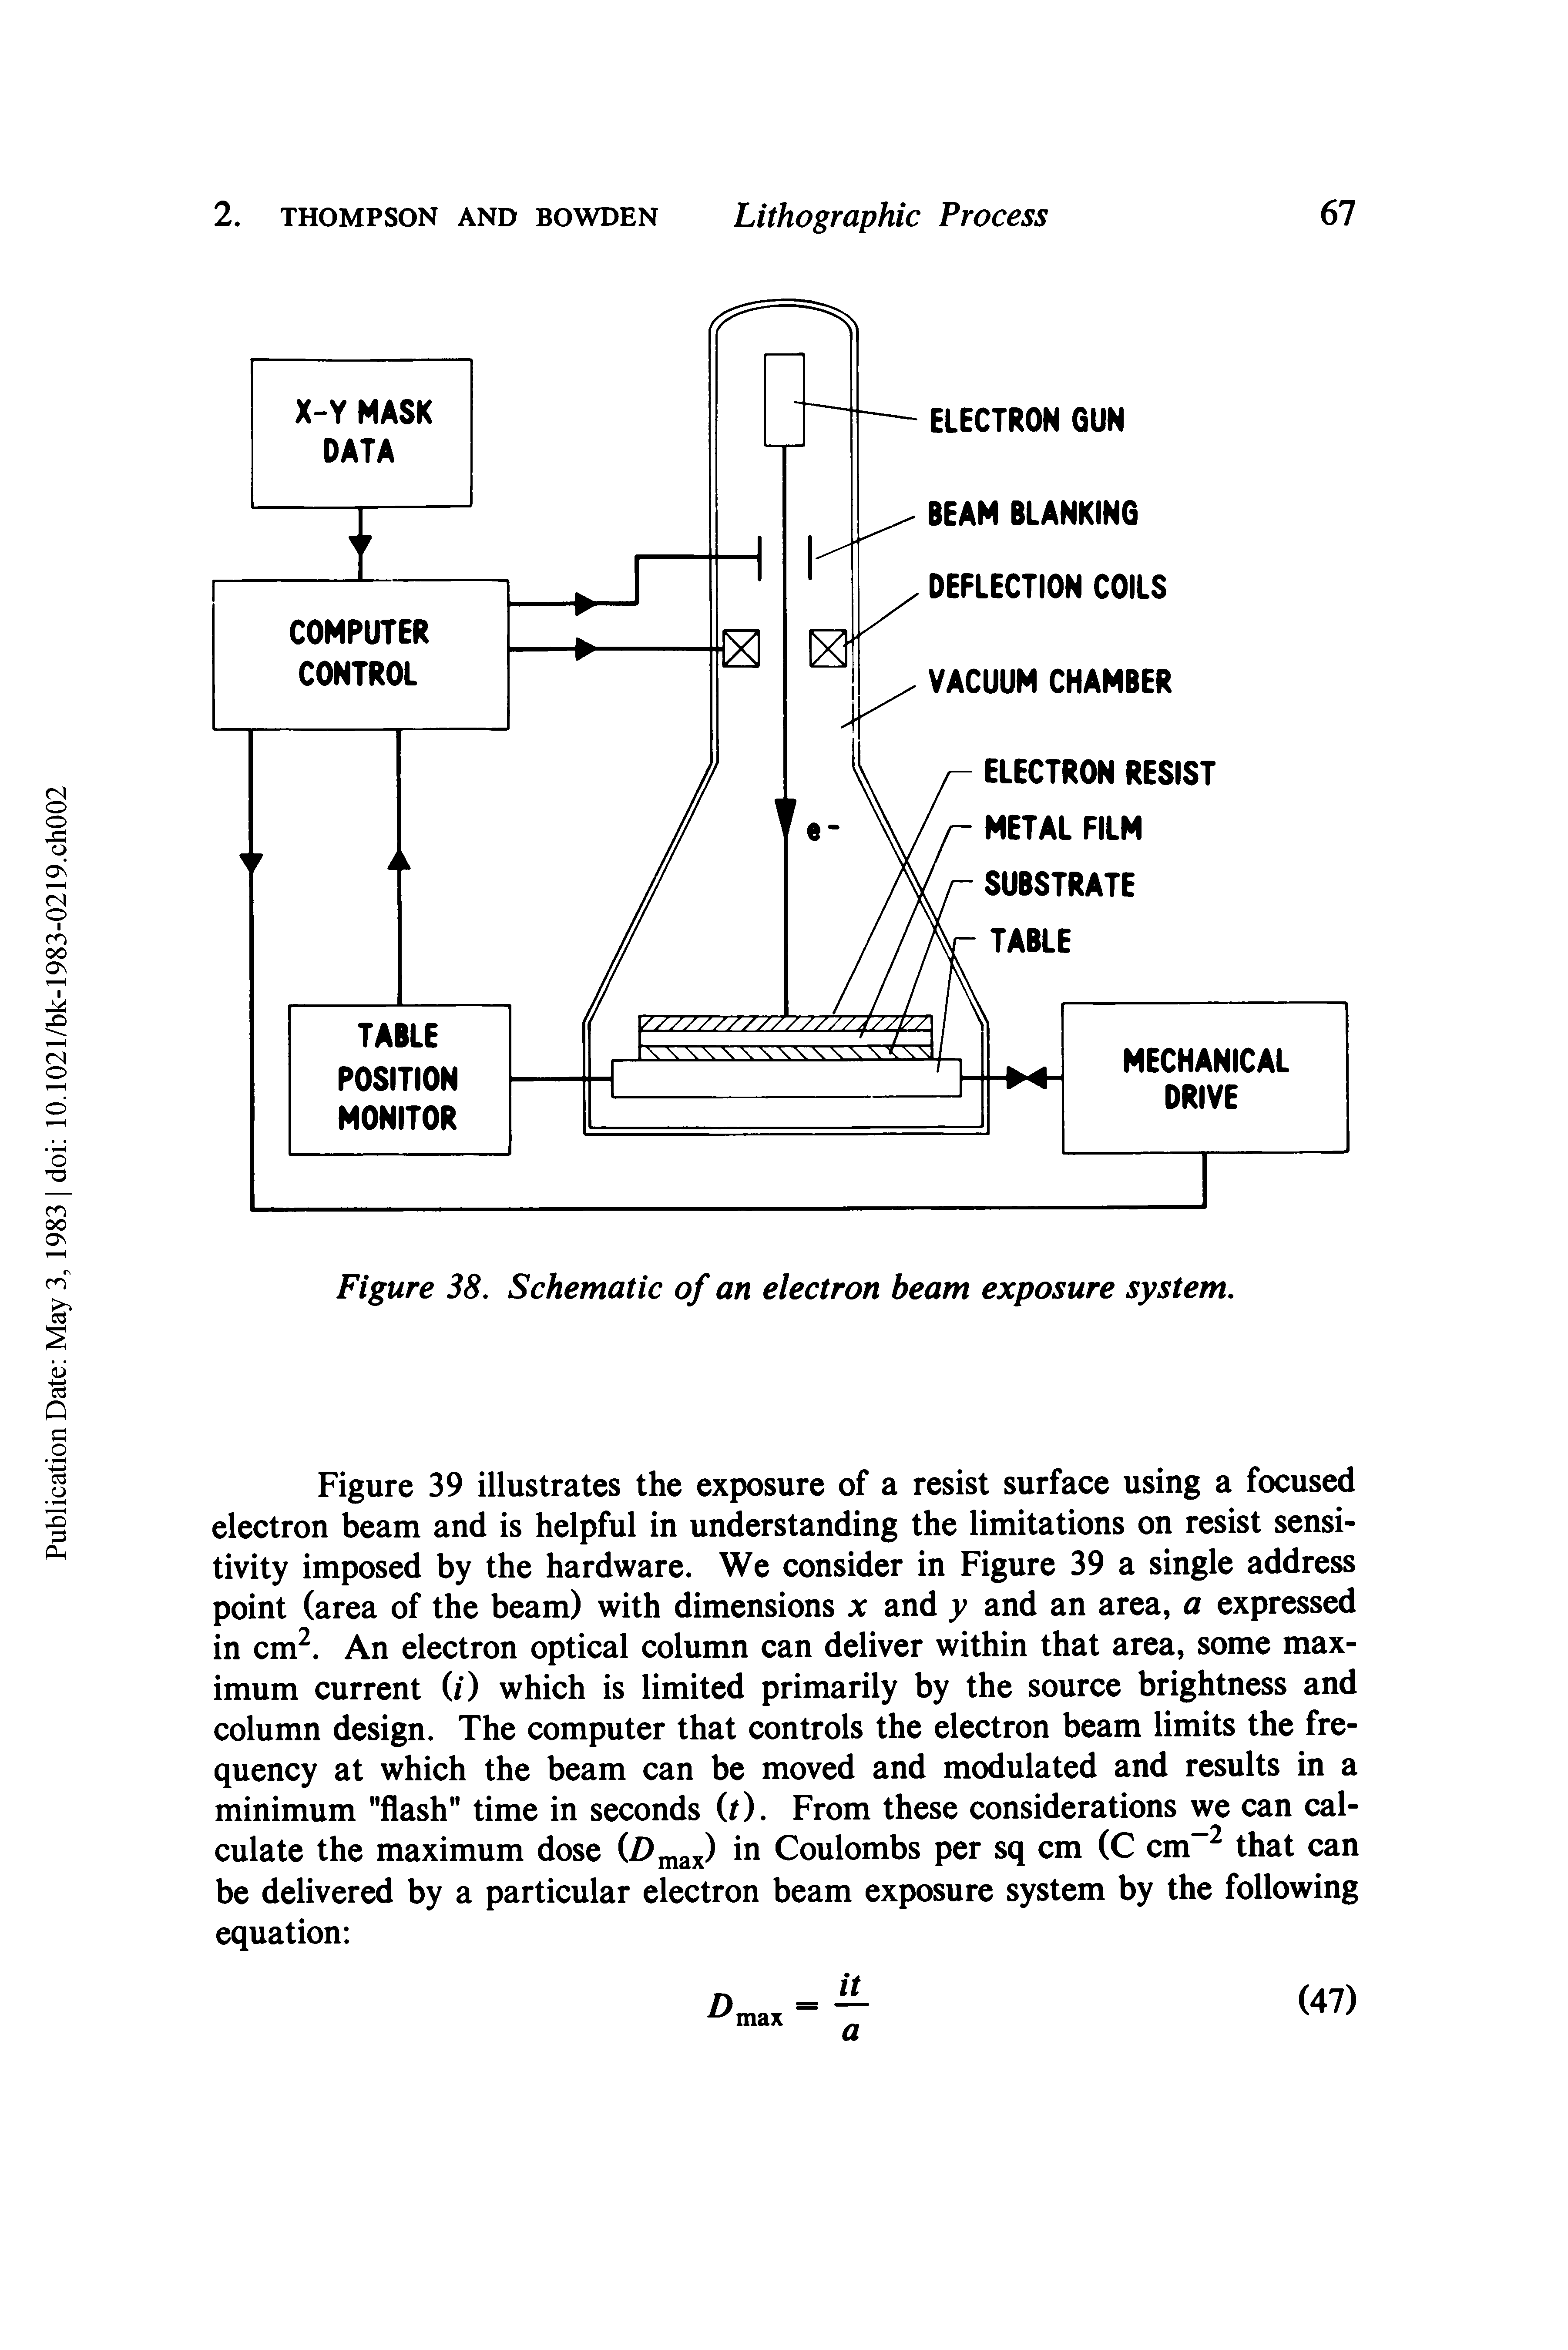 Figure 38. Schematic of an electron beam exposure system.